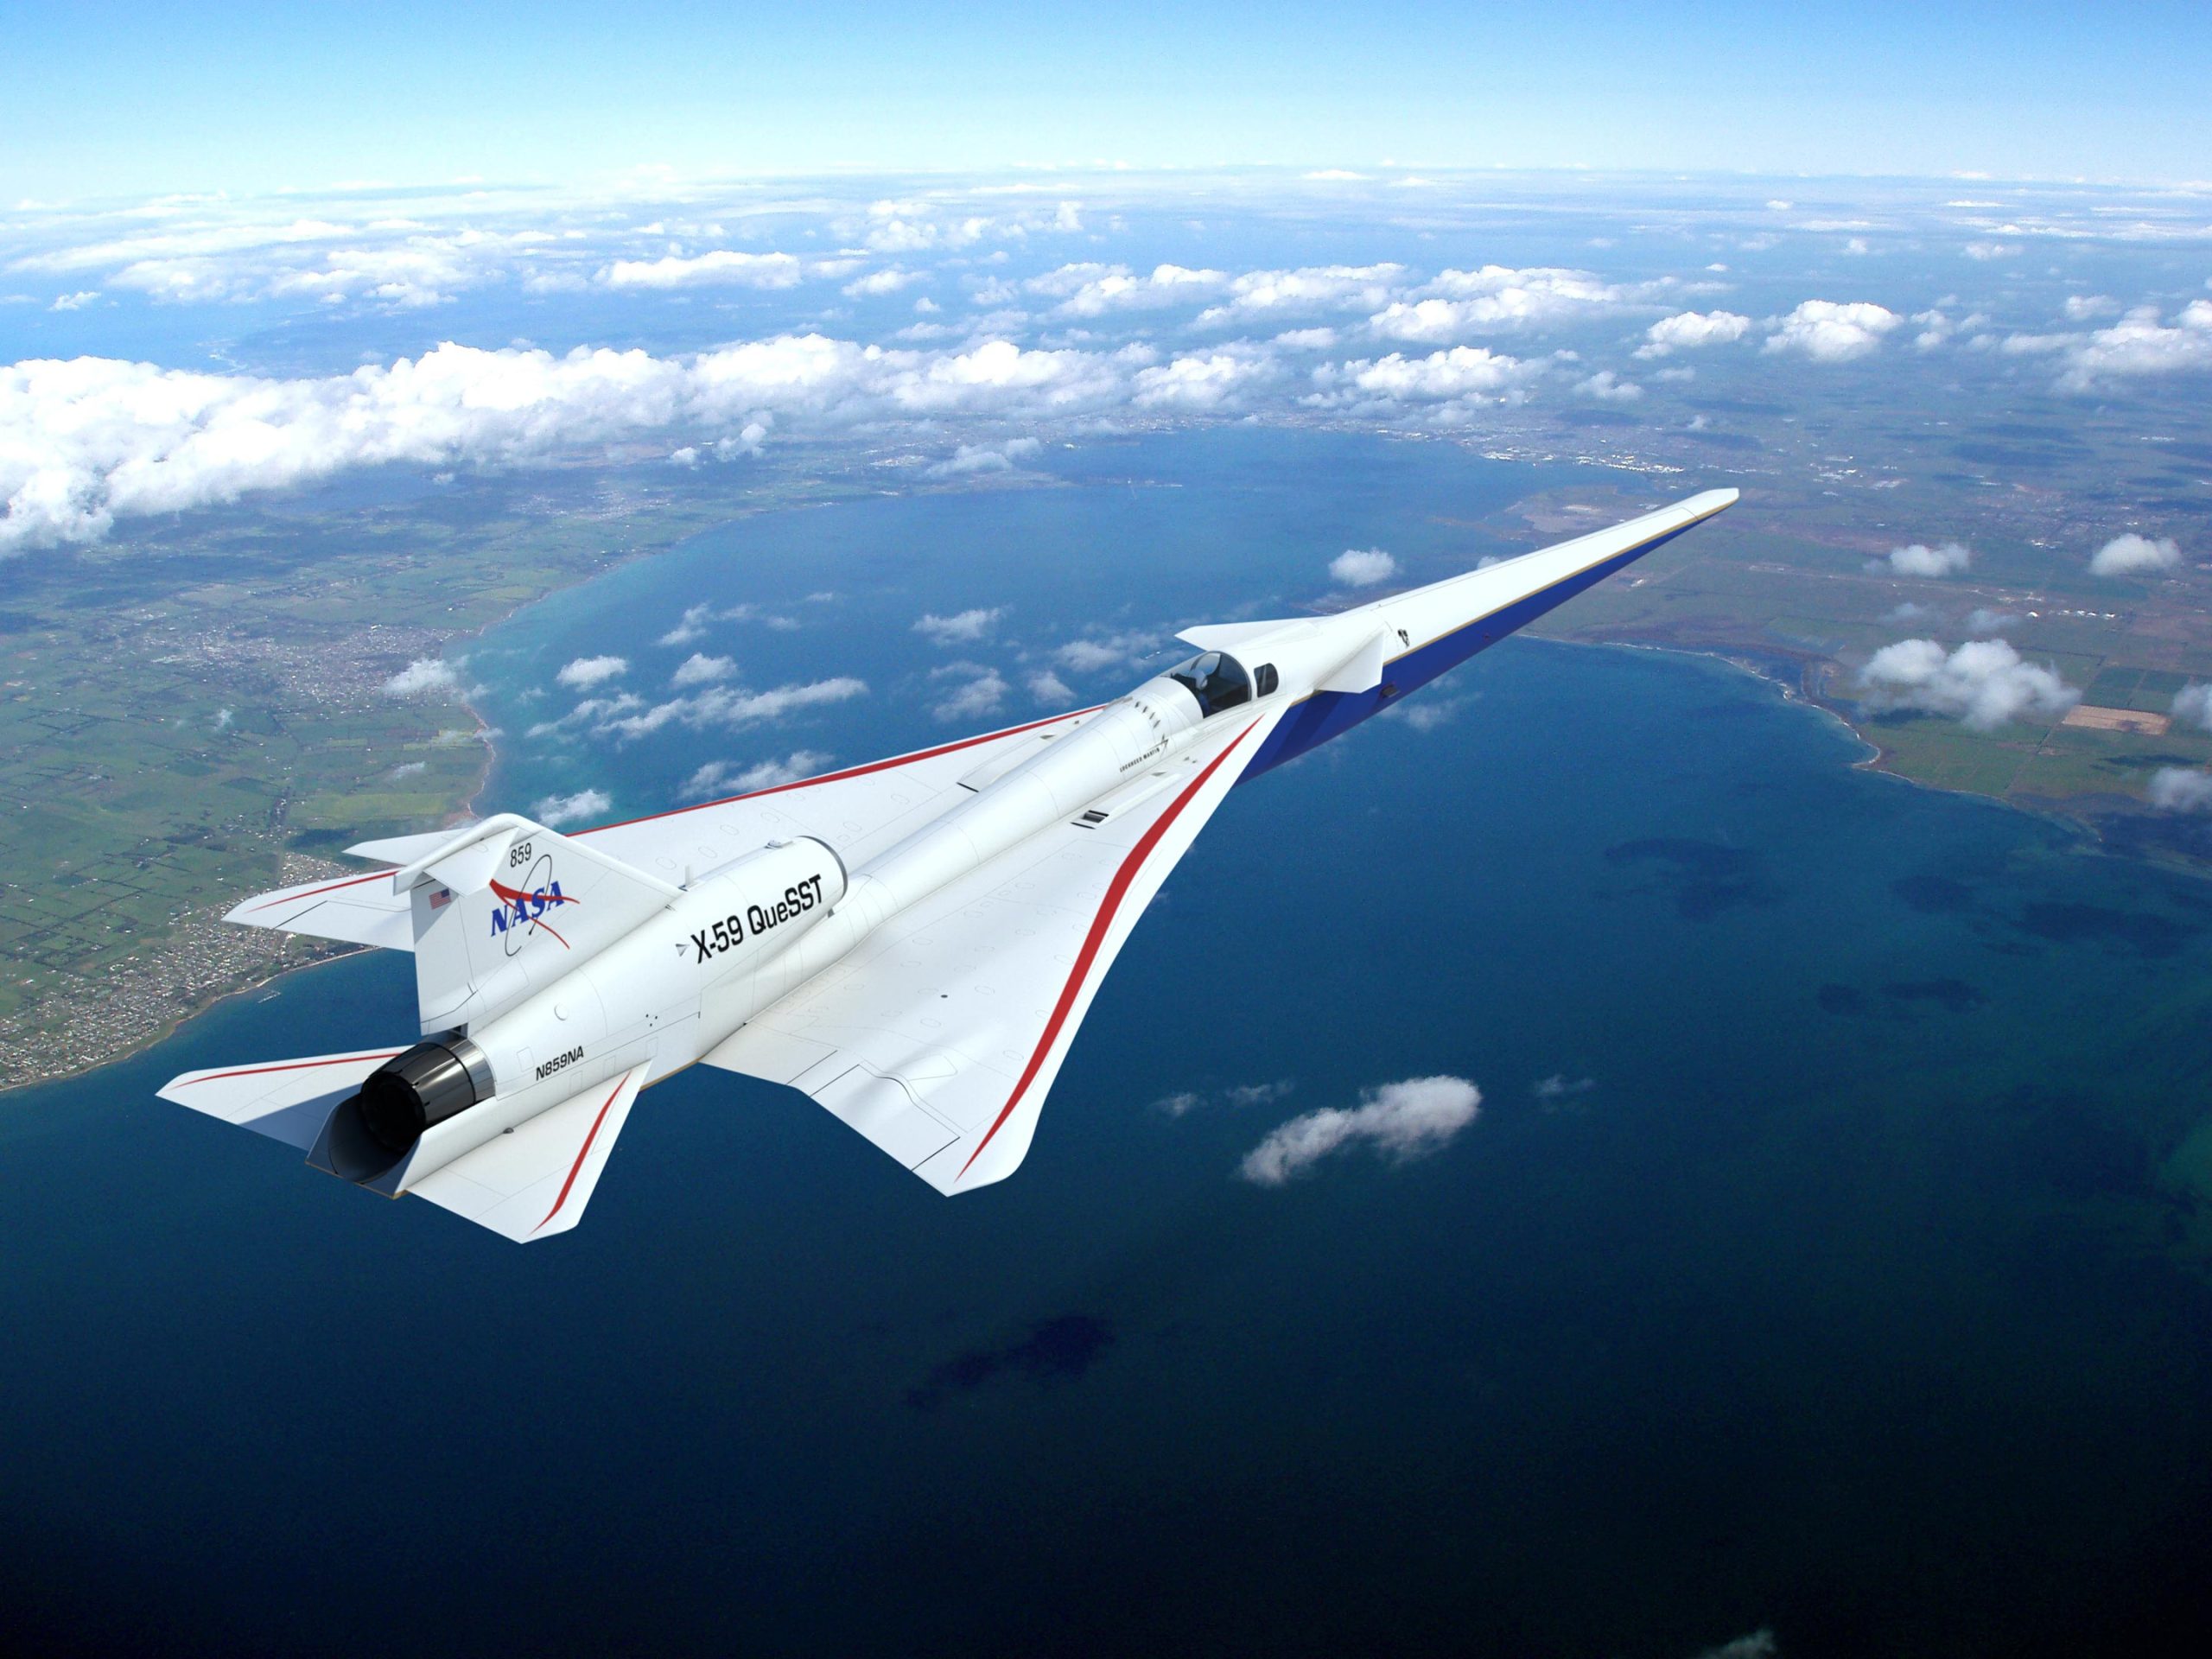 NASA’s X-59 Quiet Supersonic Aircraft Rolls Out